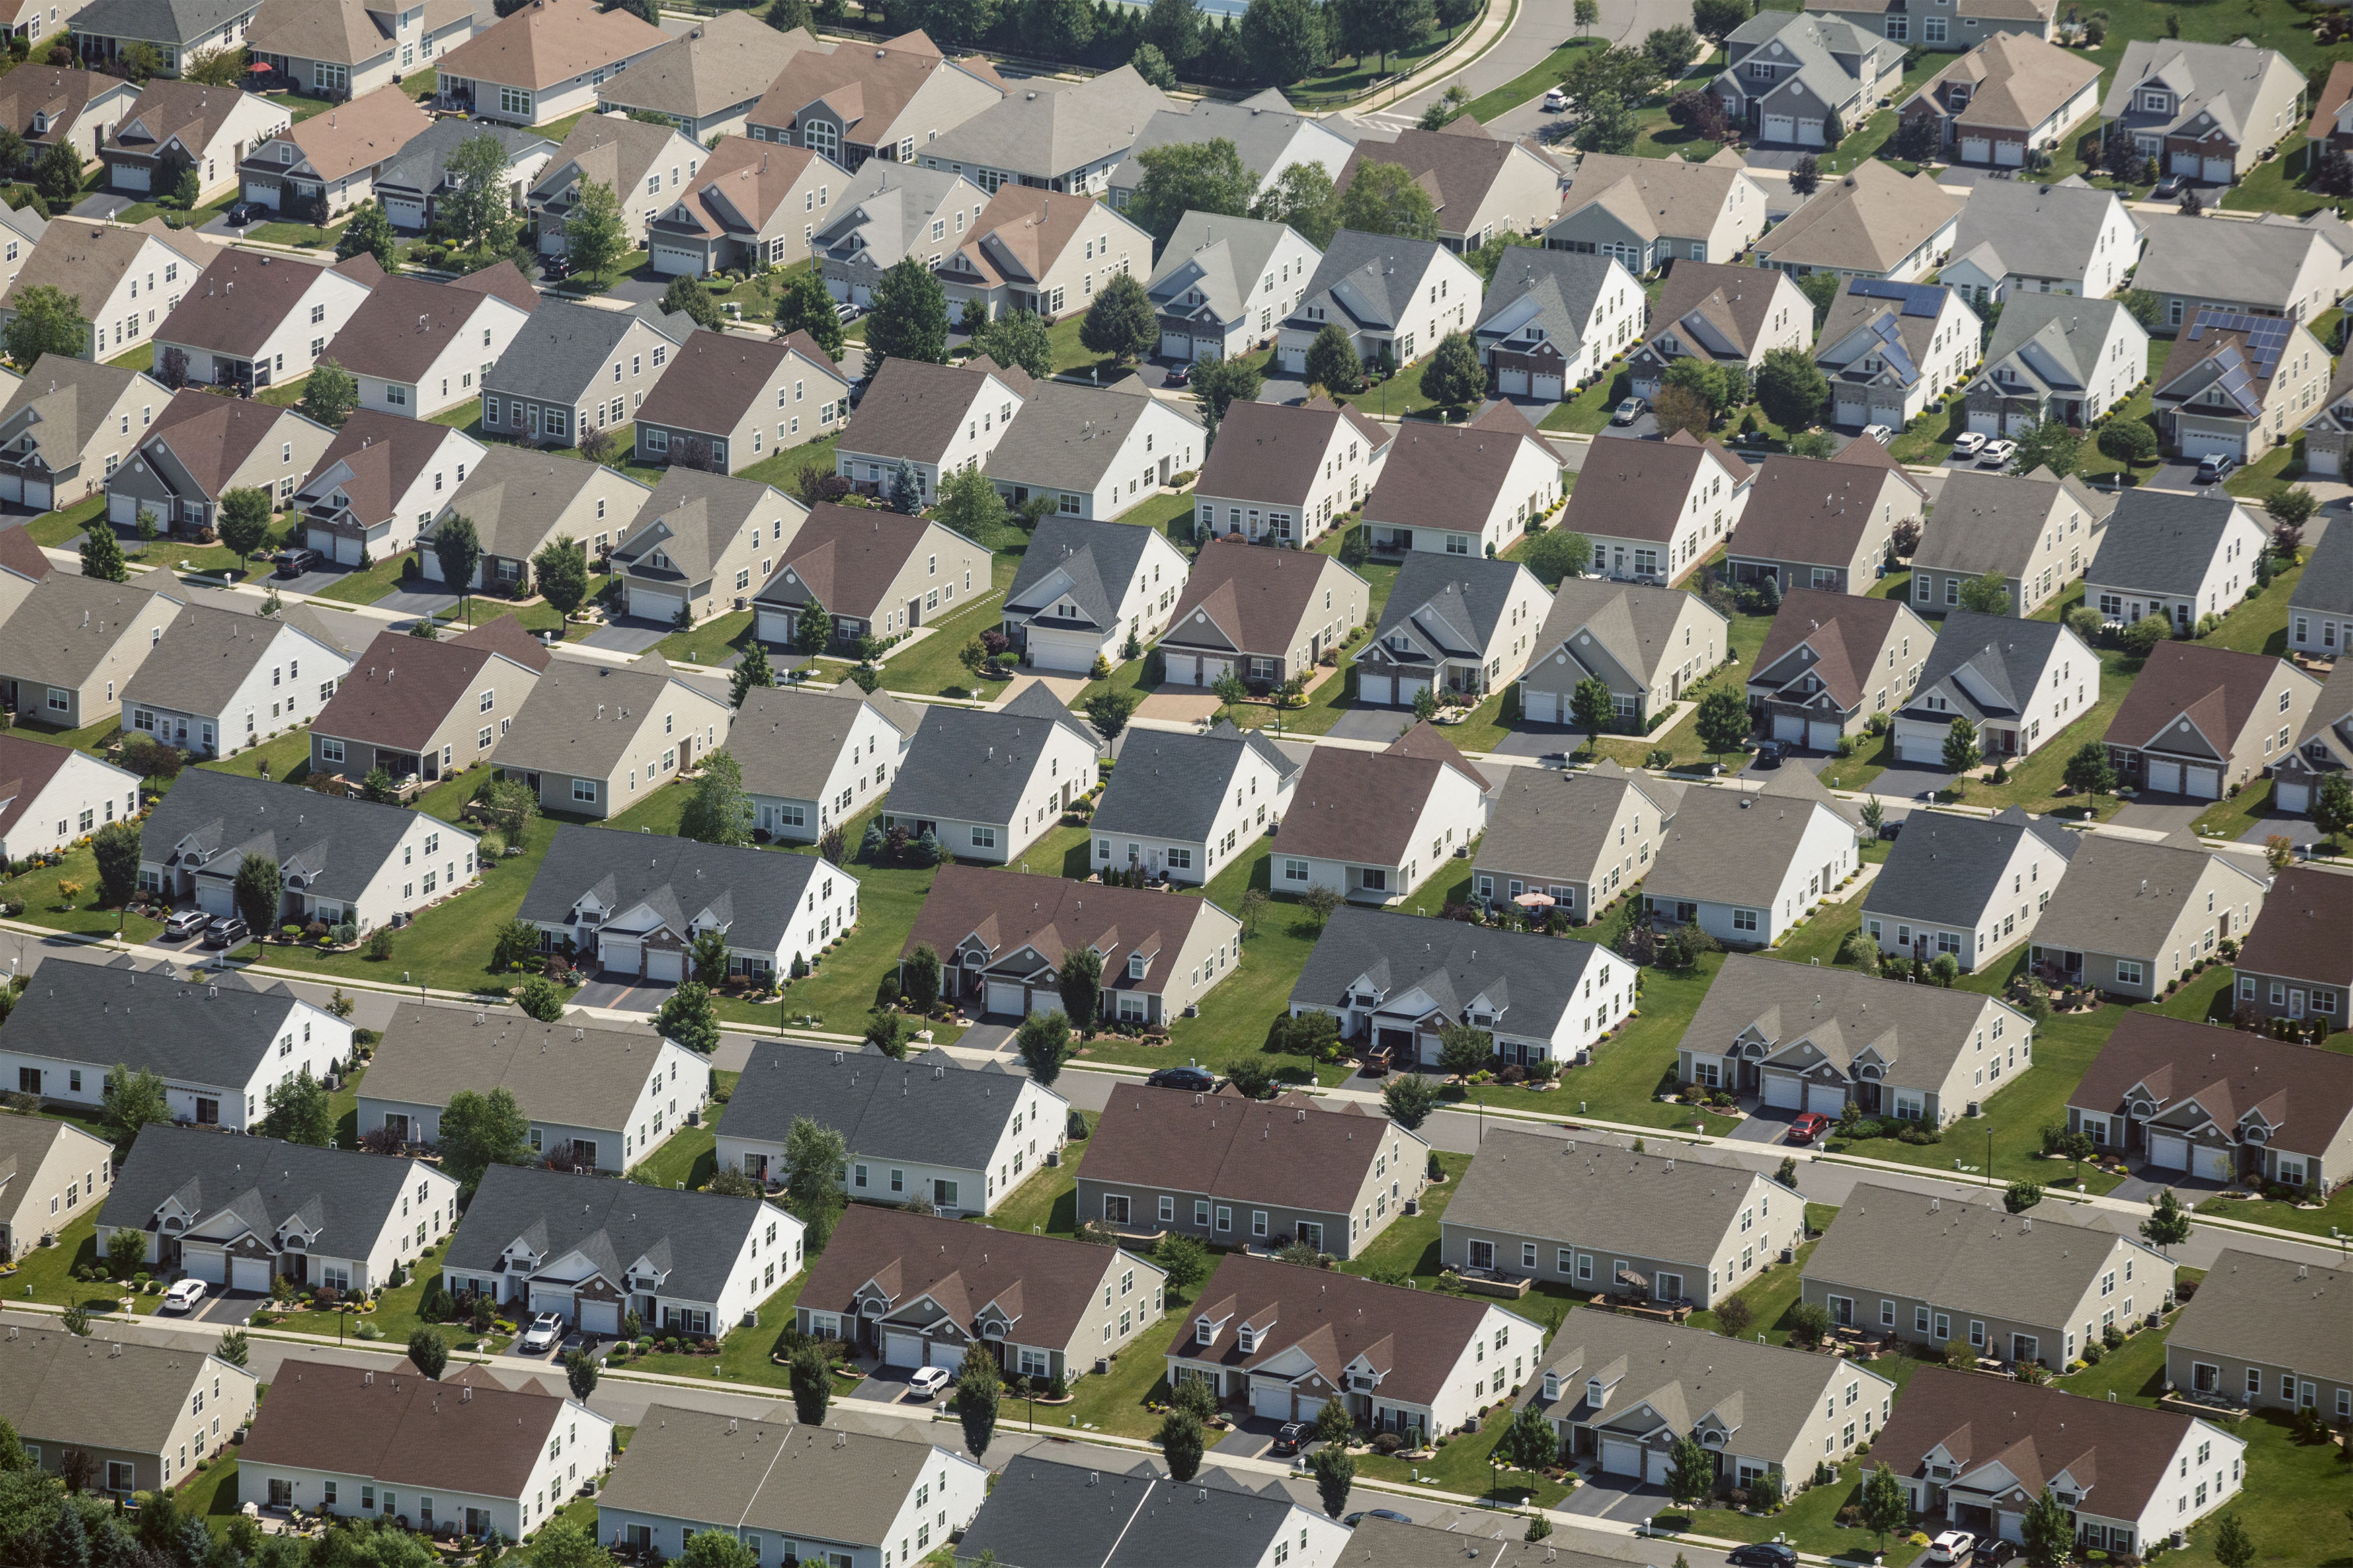 An arial view of single family houses.